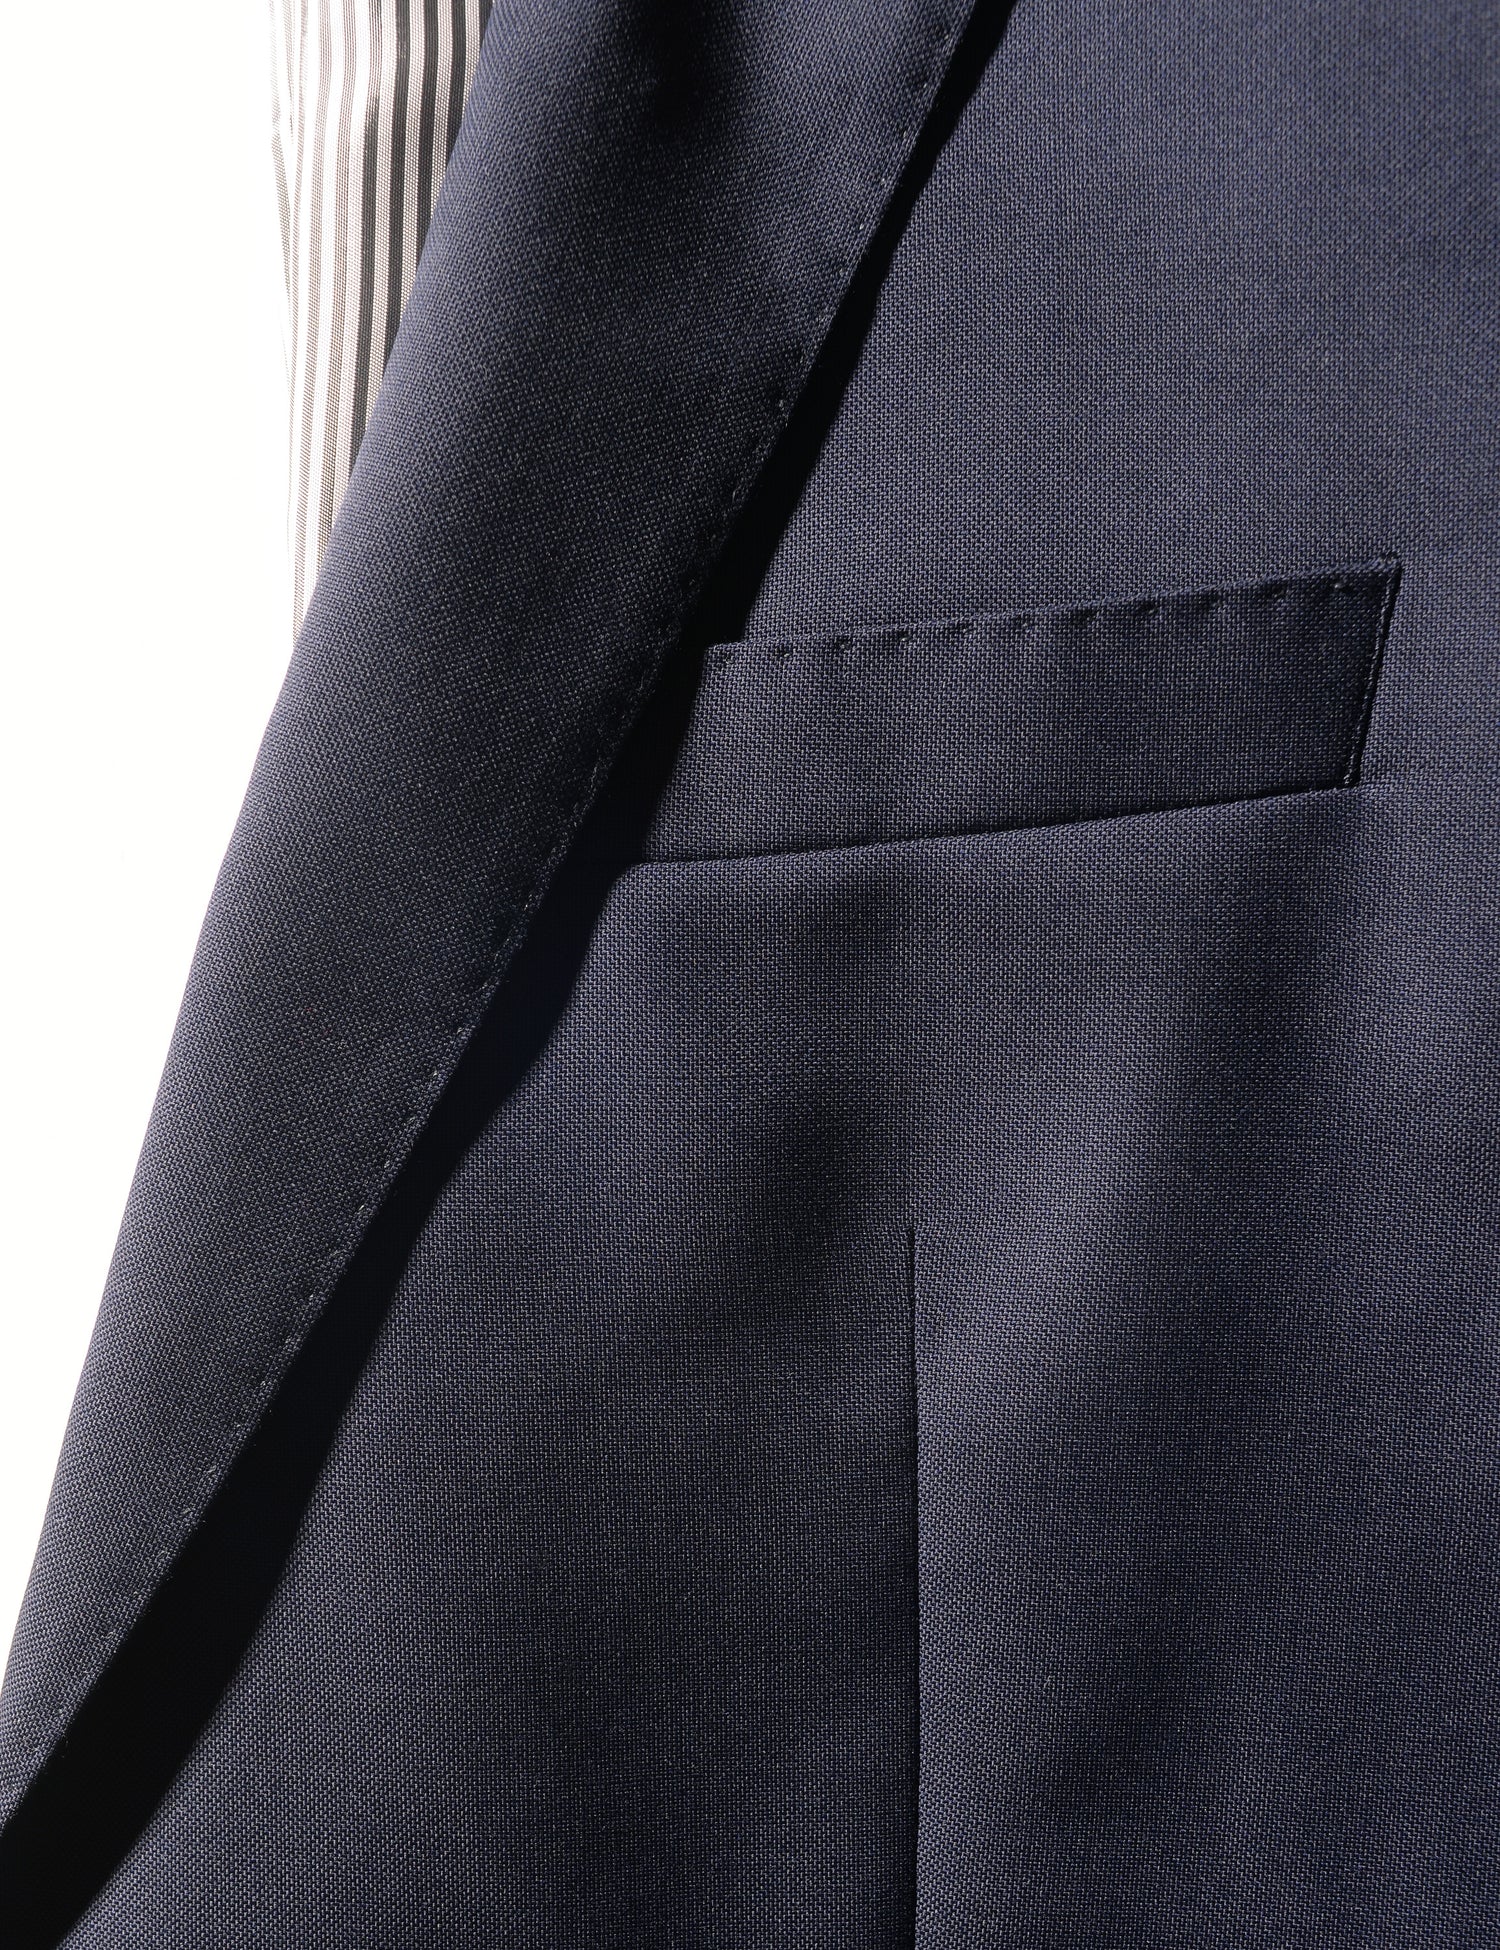 Detail shot of Brooklyn Tailors BKT50 Tailored Jacket in Super 110s Plainweave - Classic Navy showing lapel and chest pocket